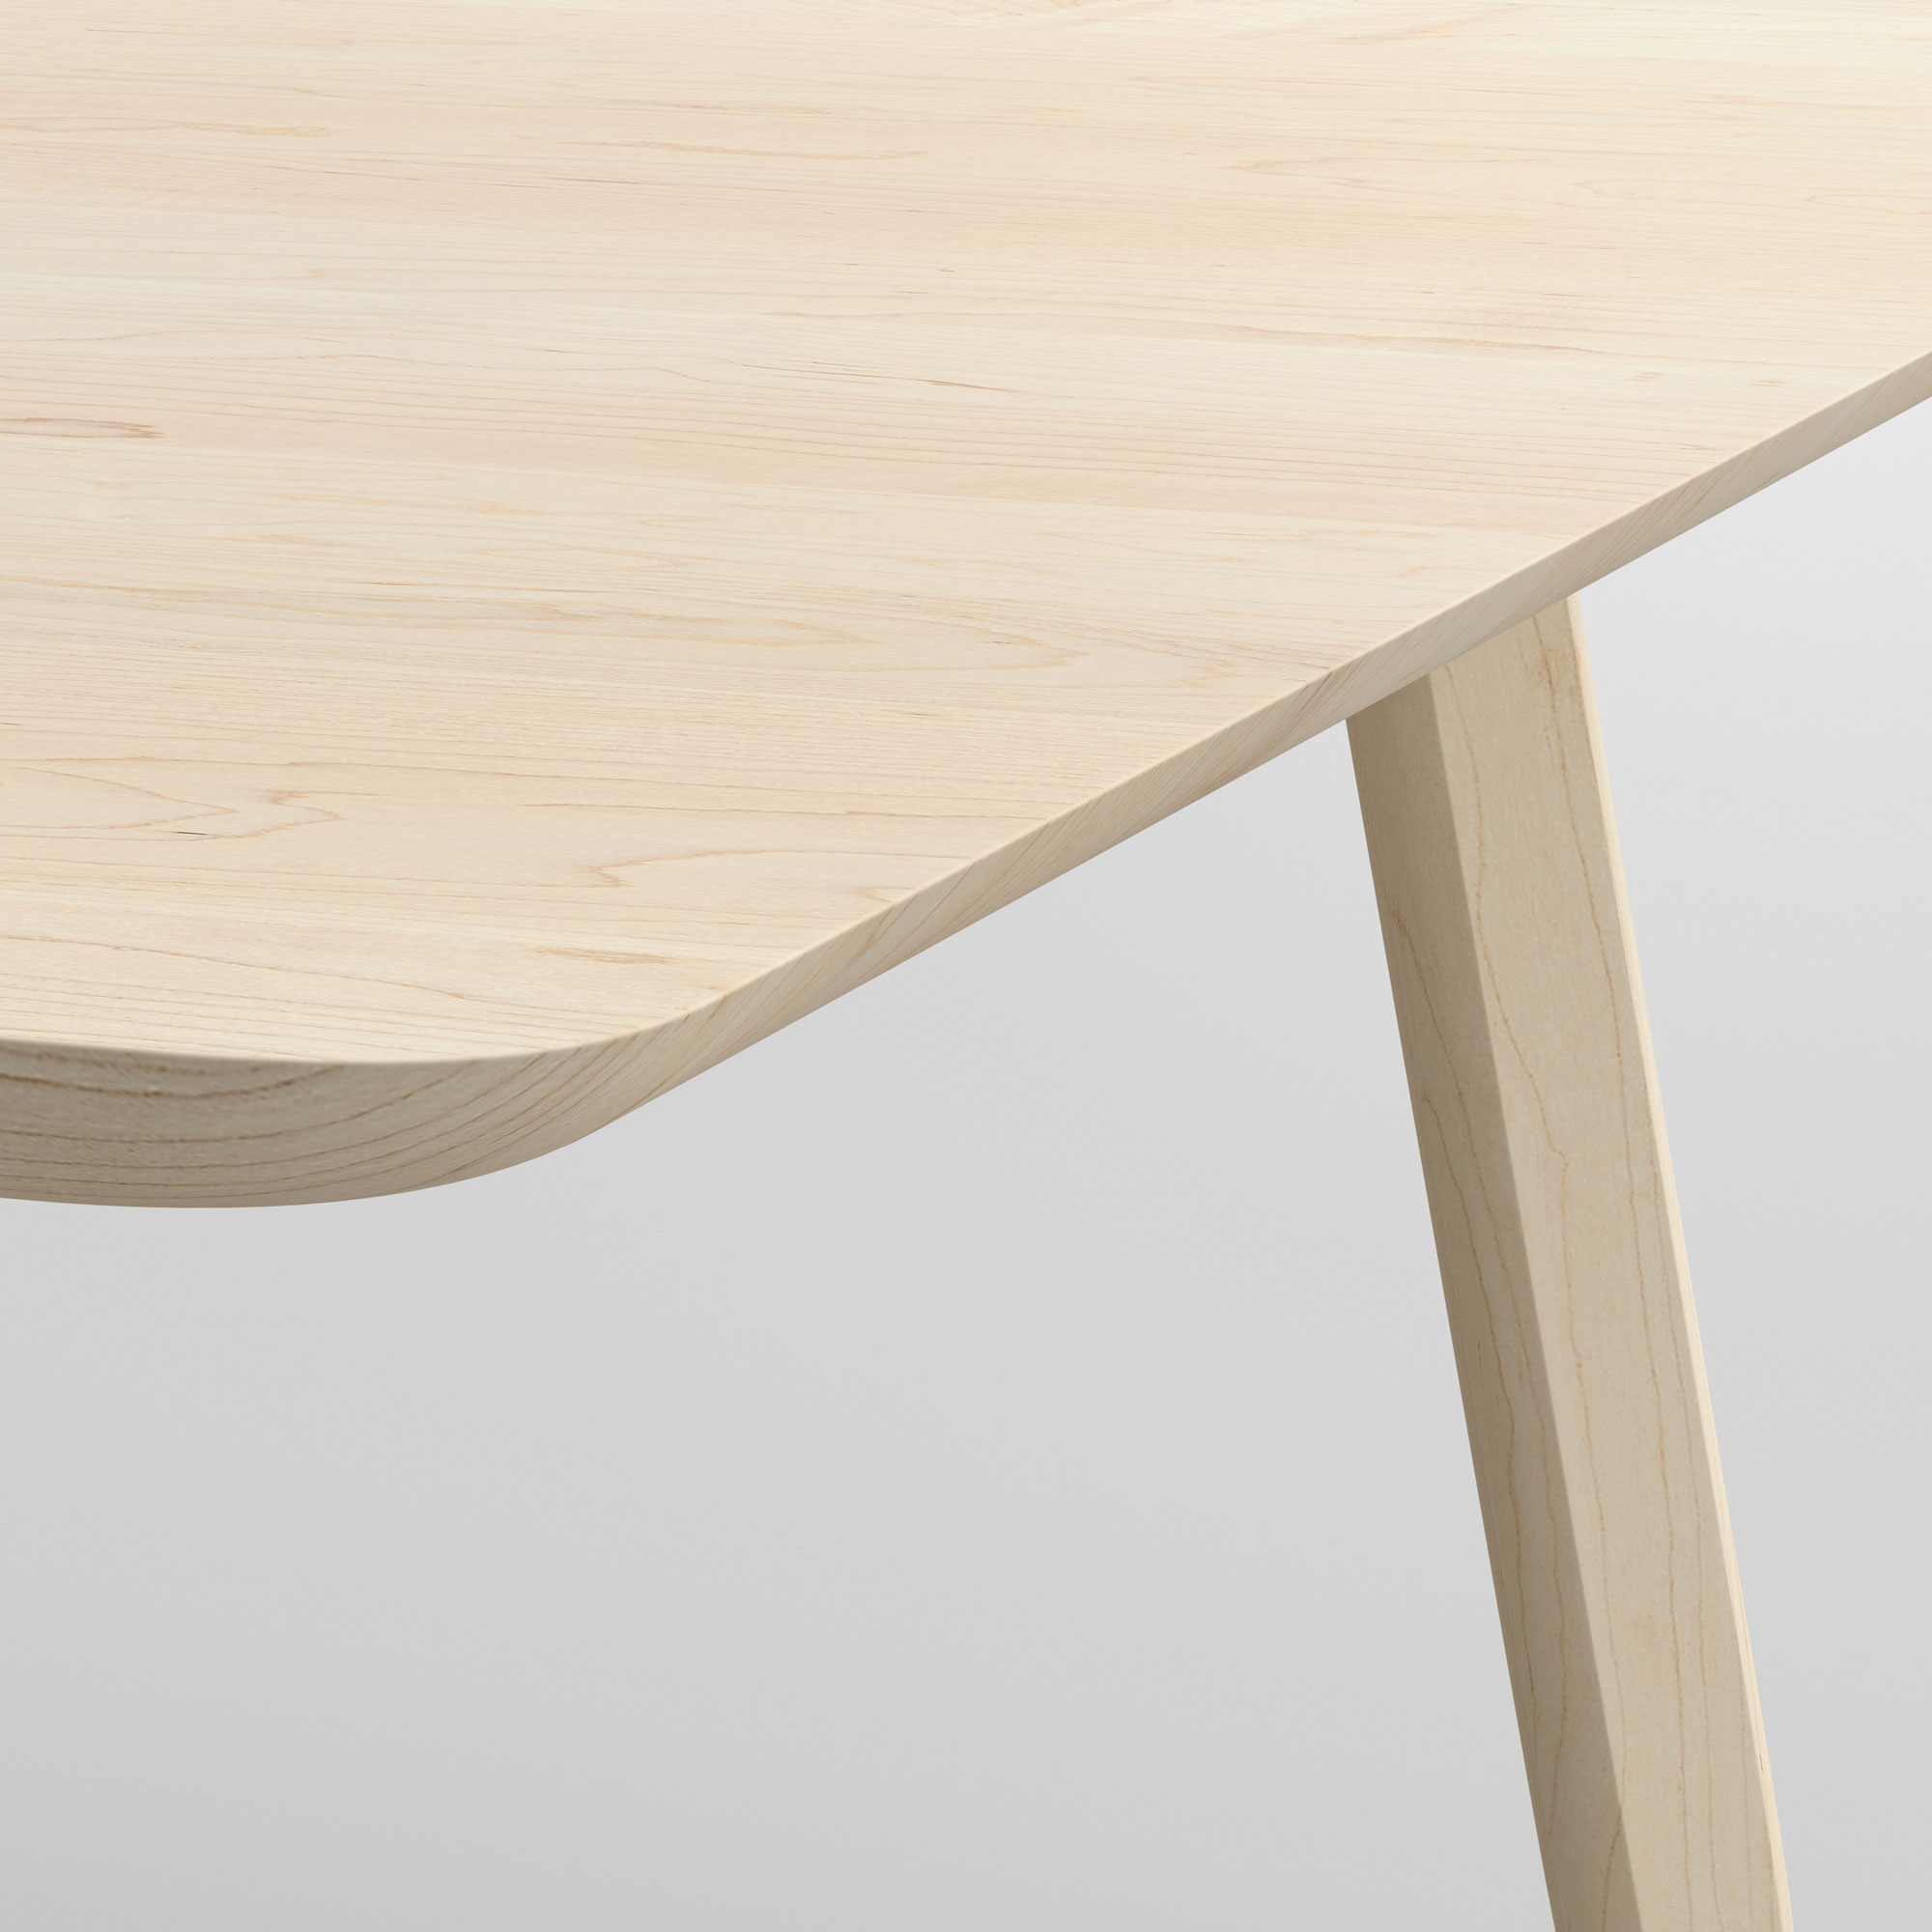 Stylish Dining Table AETAS BASIC 4 vitamin-design custom made in solid wood by vitamin design